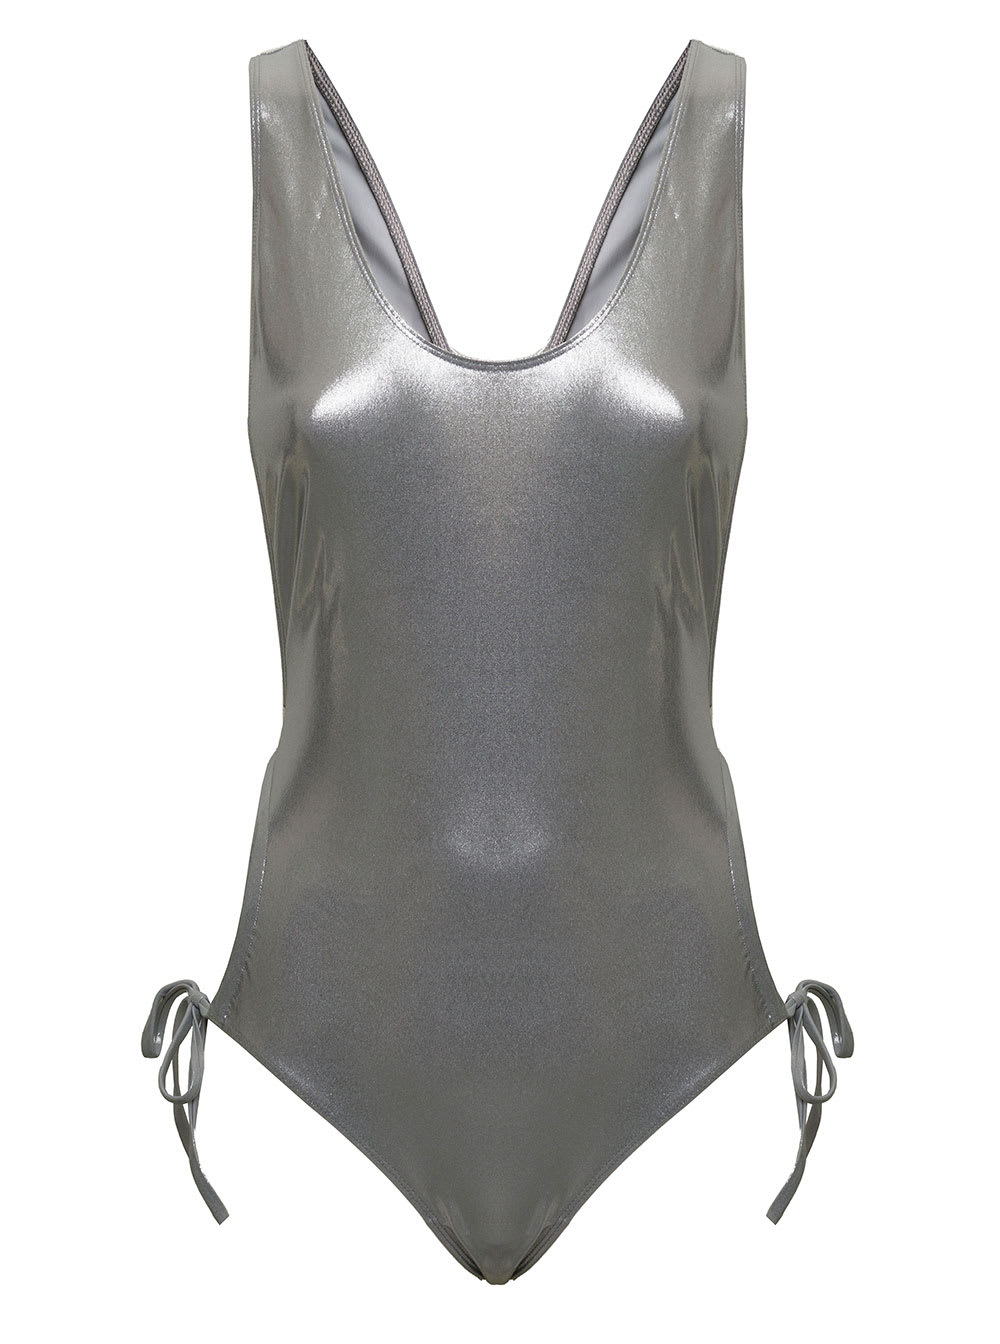 Isabel Marant Isablel Marant Womans Symis One-piece Silver Strerch Fabric Swimsuit